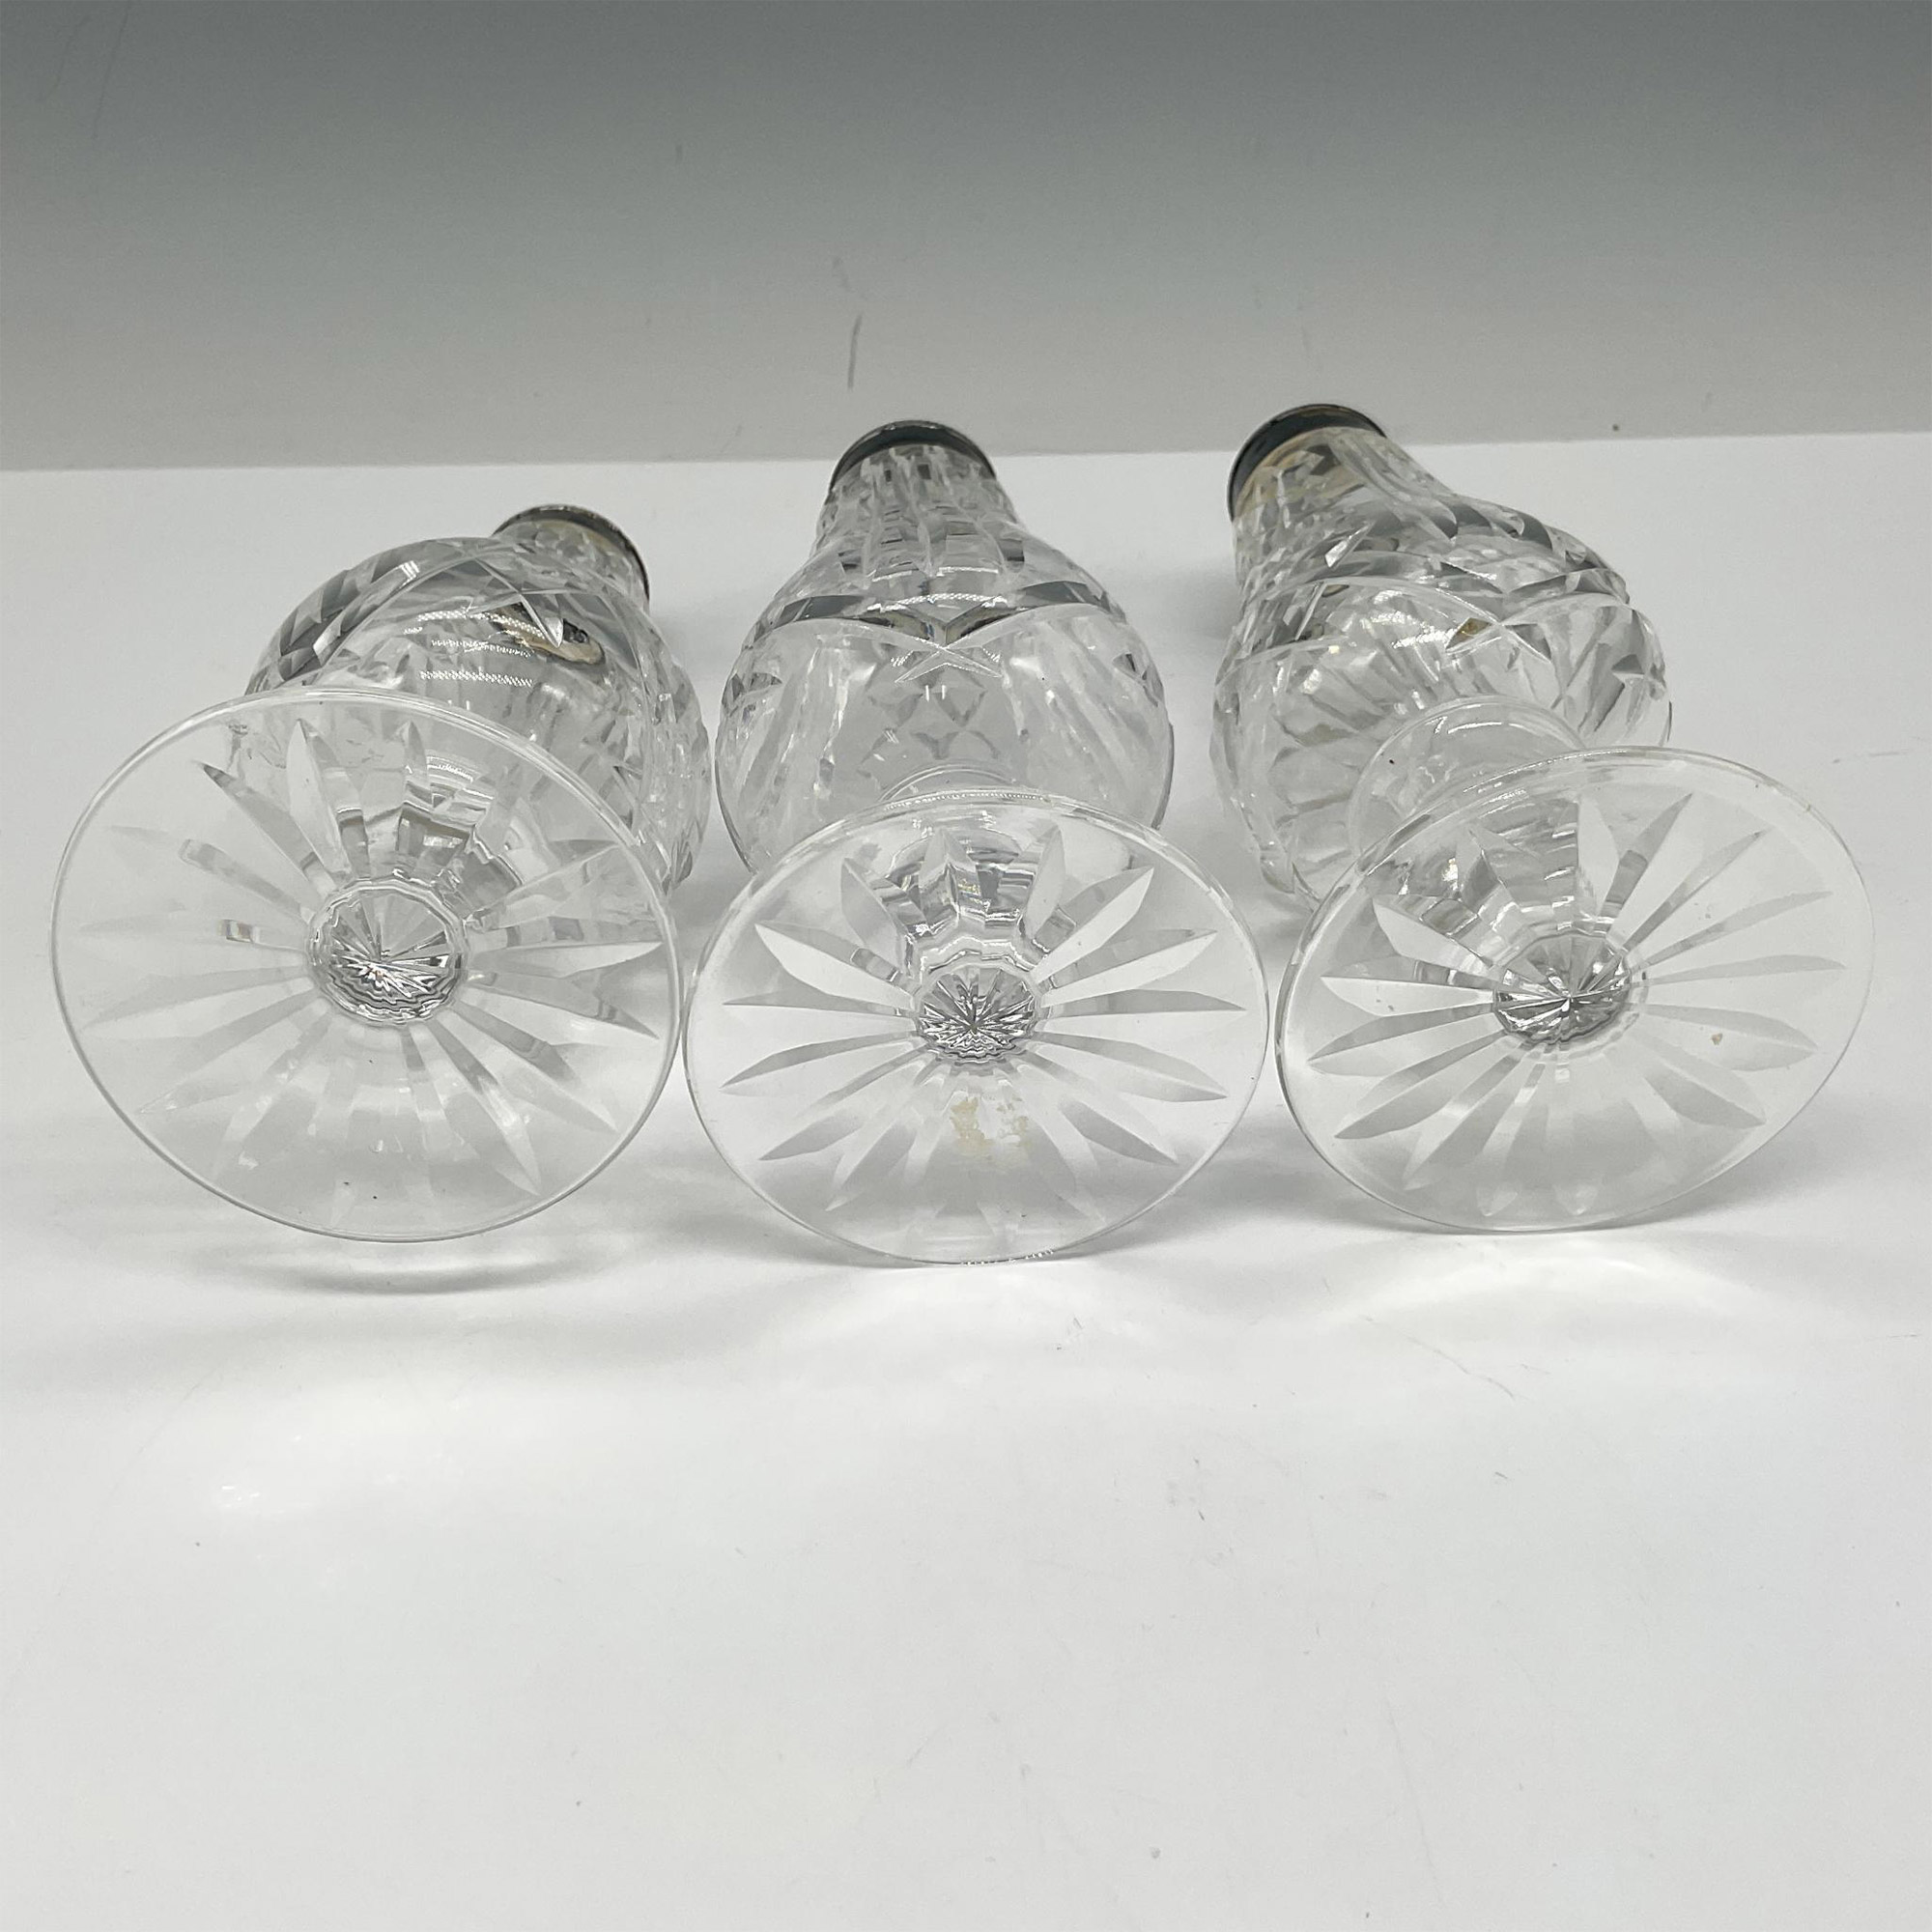 3pc Waterford Crystal Shakers - Image 3 of 3